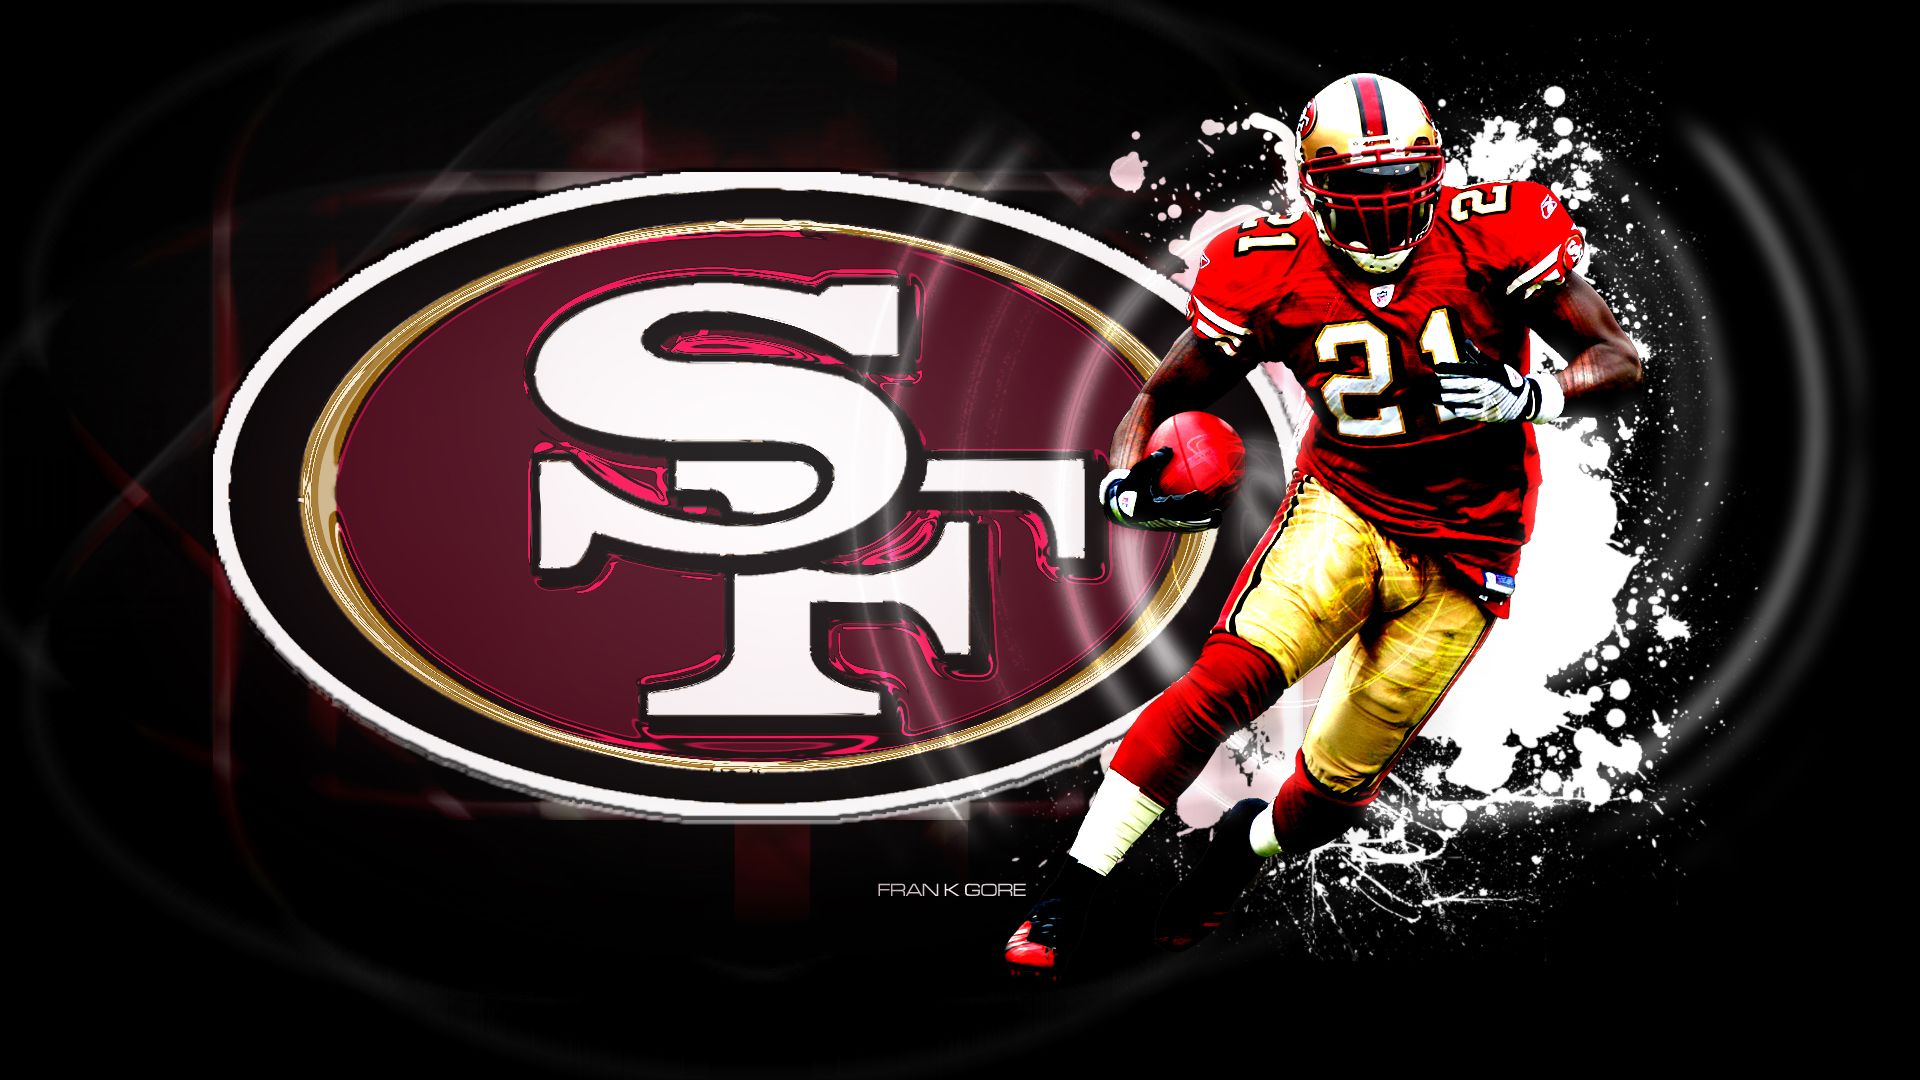 49ers images | cute Wallpapers